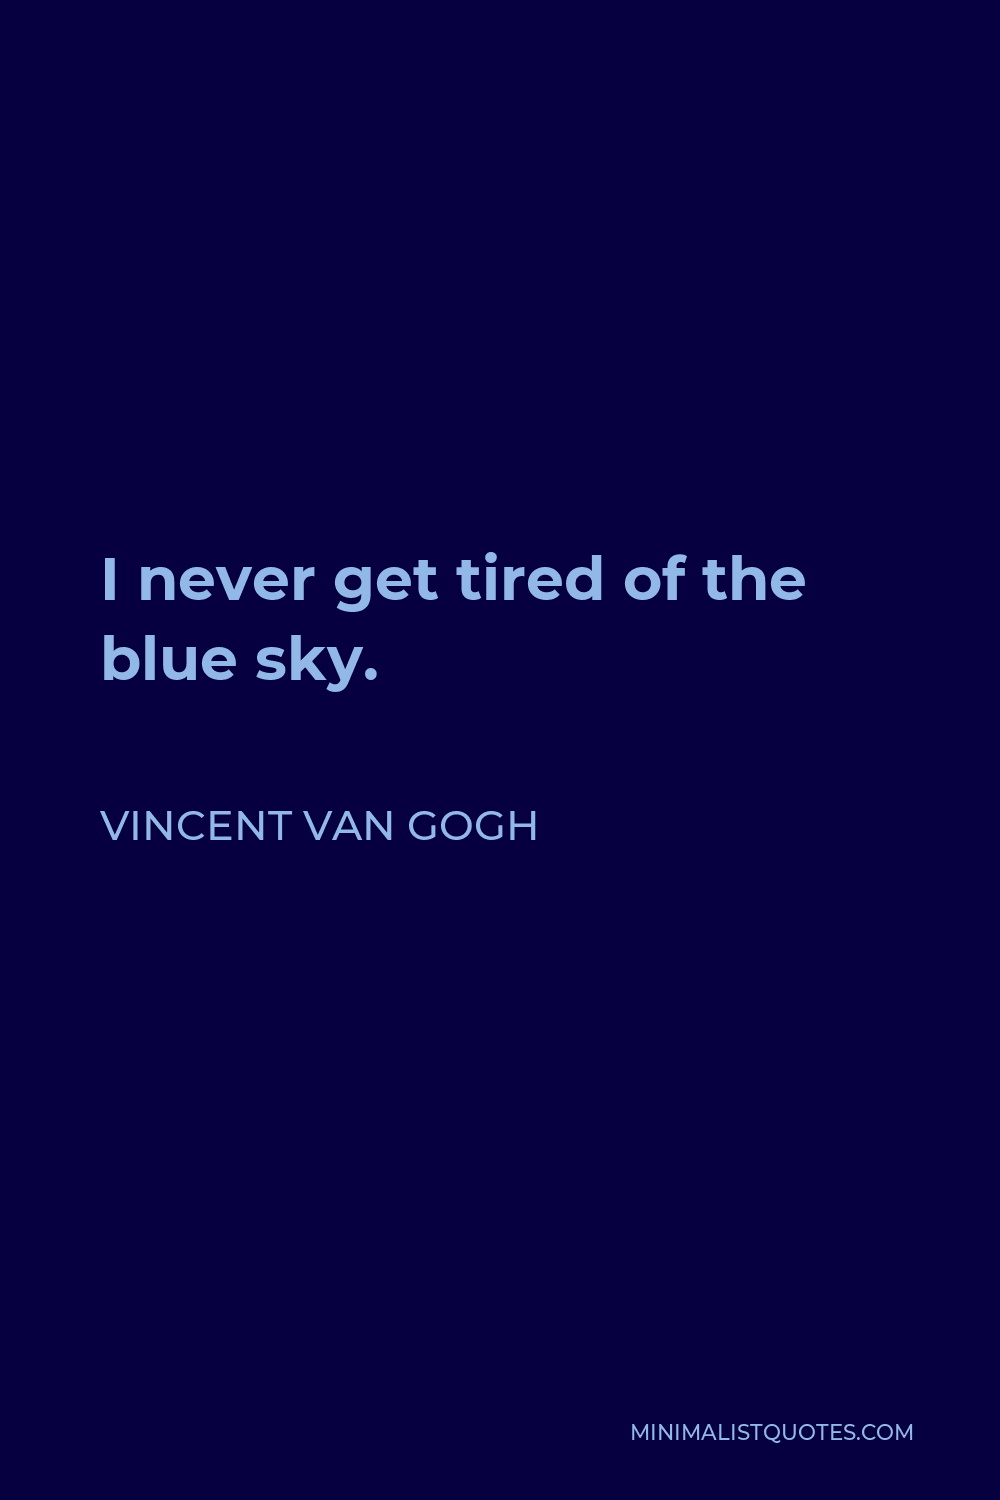 Vincent Van Gogh Quote - I never get tired of the blue sky.